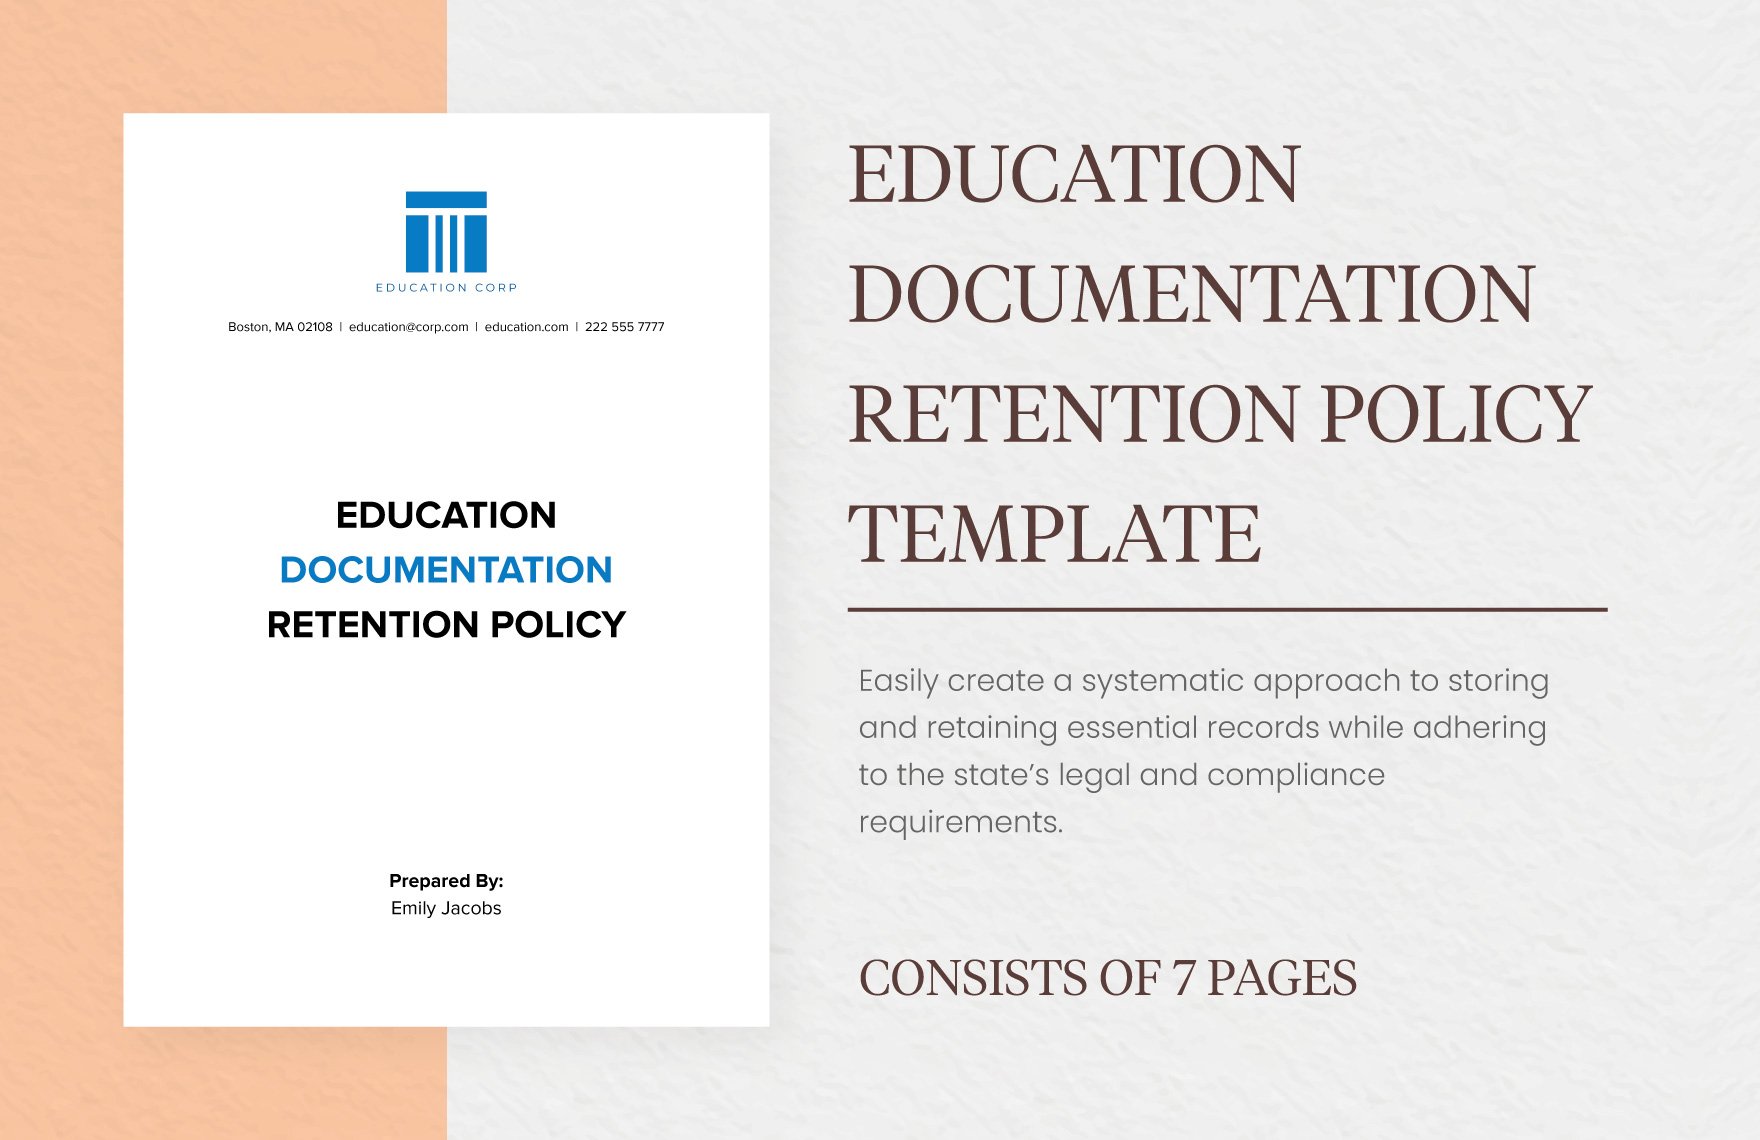 Education Documentation Retention Policy Template